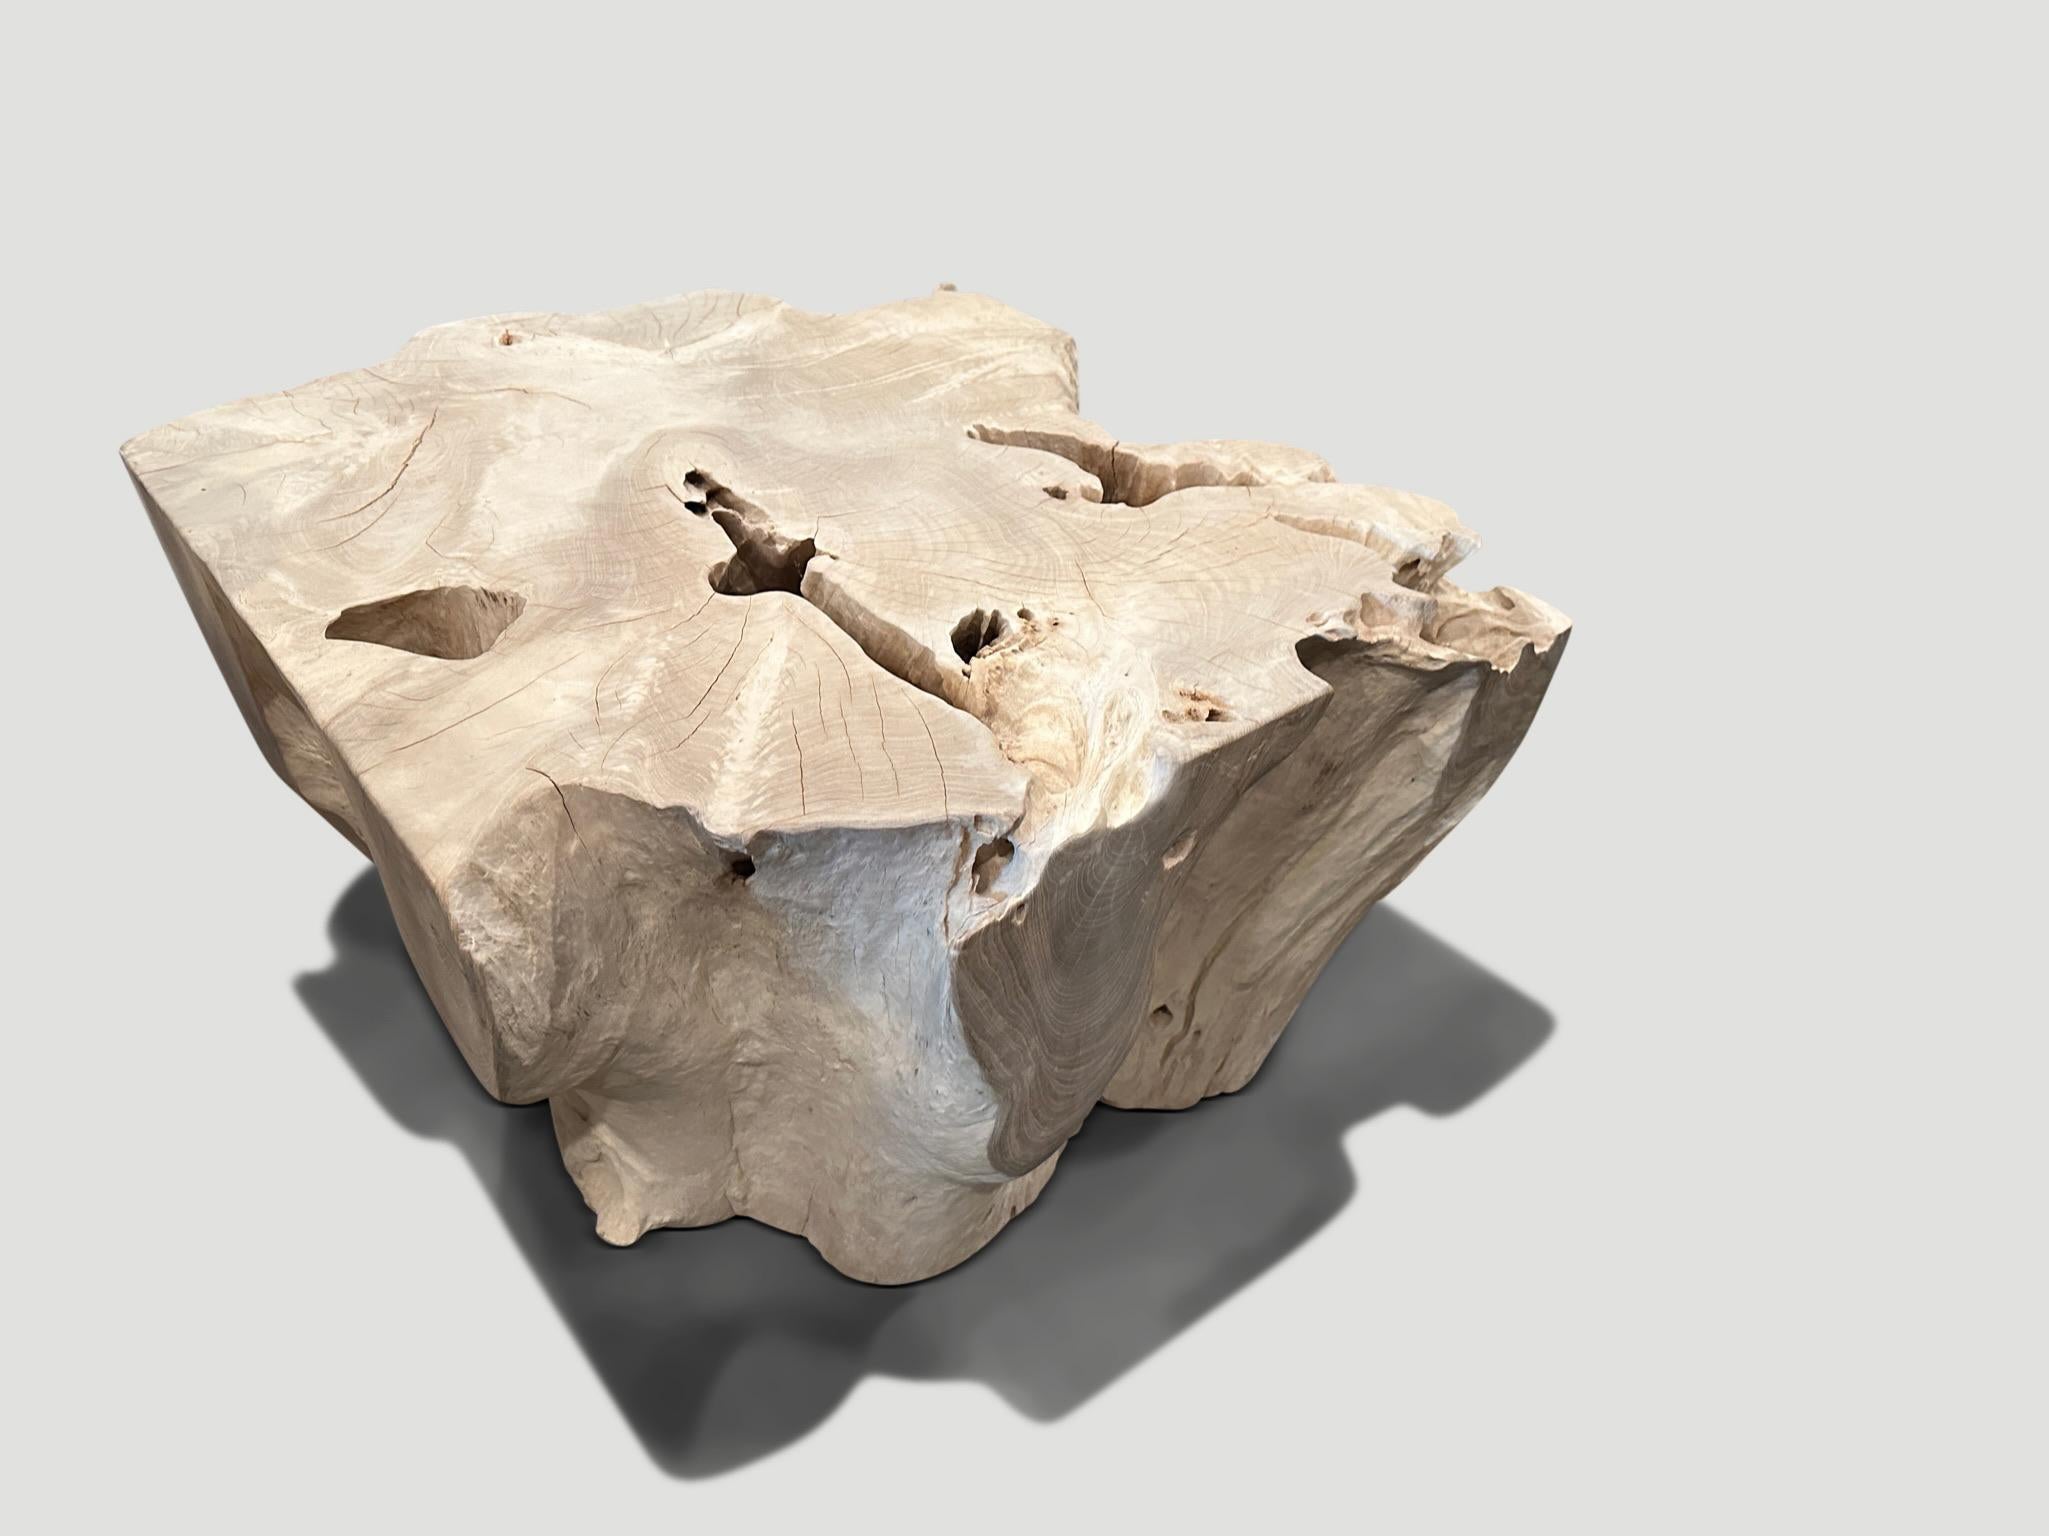 Contemporary Andrianna Shamaris Bleached Teak Wood Sculptural Coffee Table or Pedestal For Sale